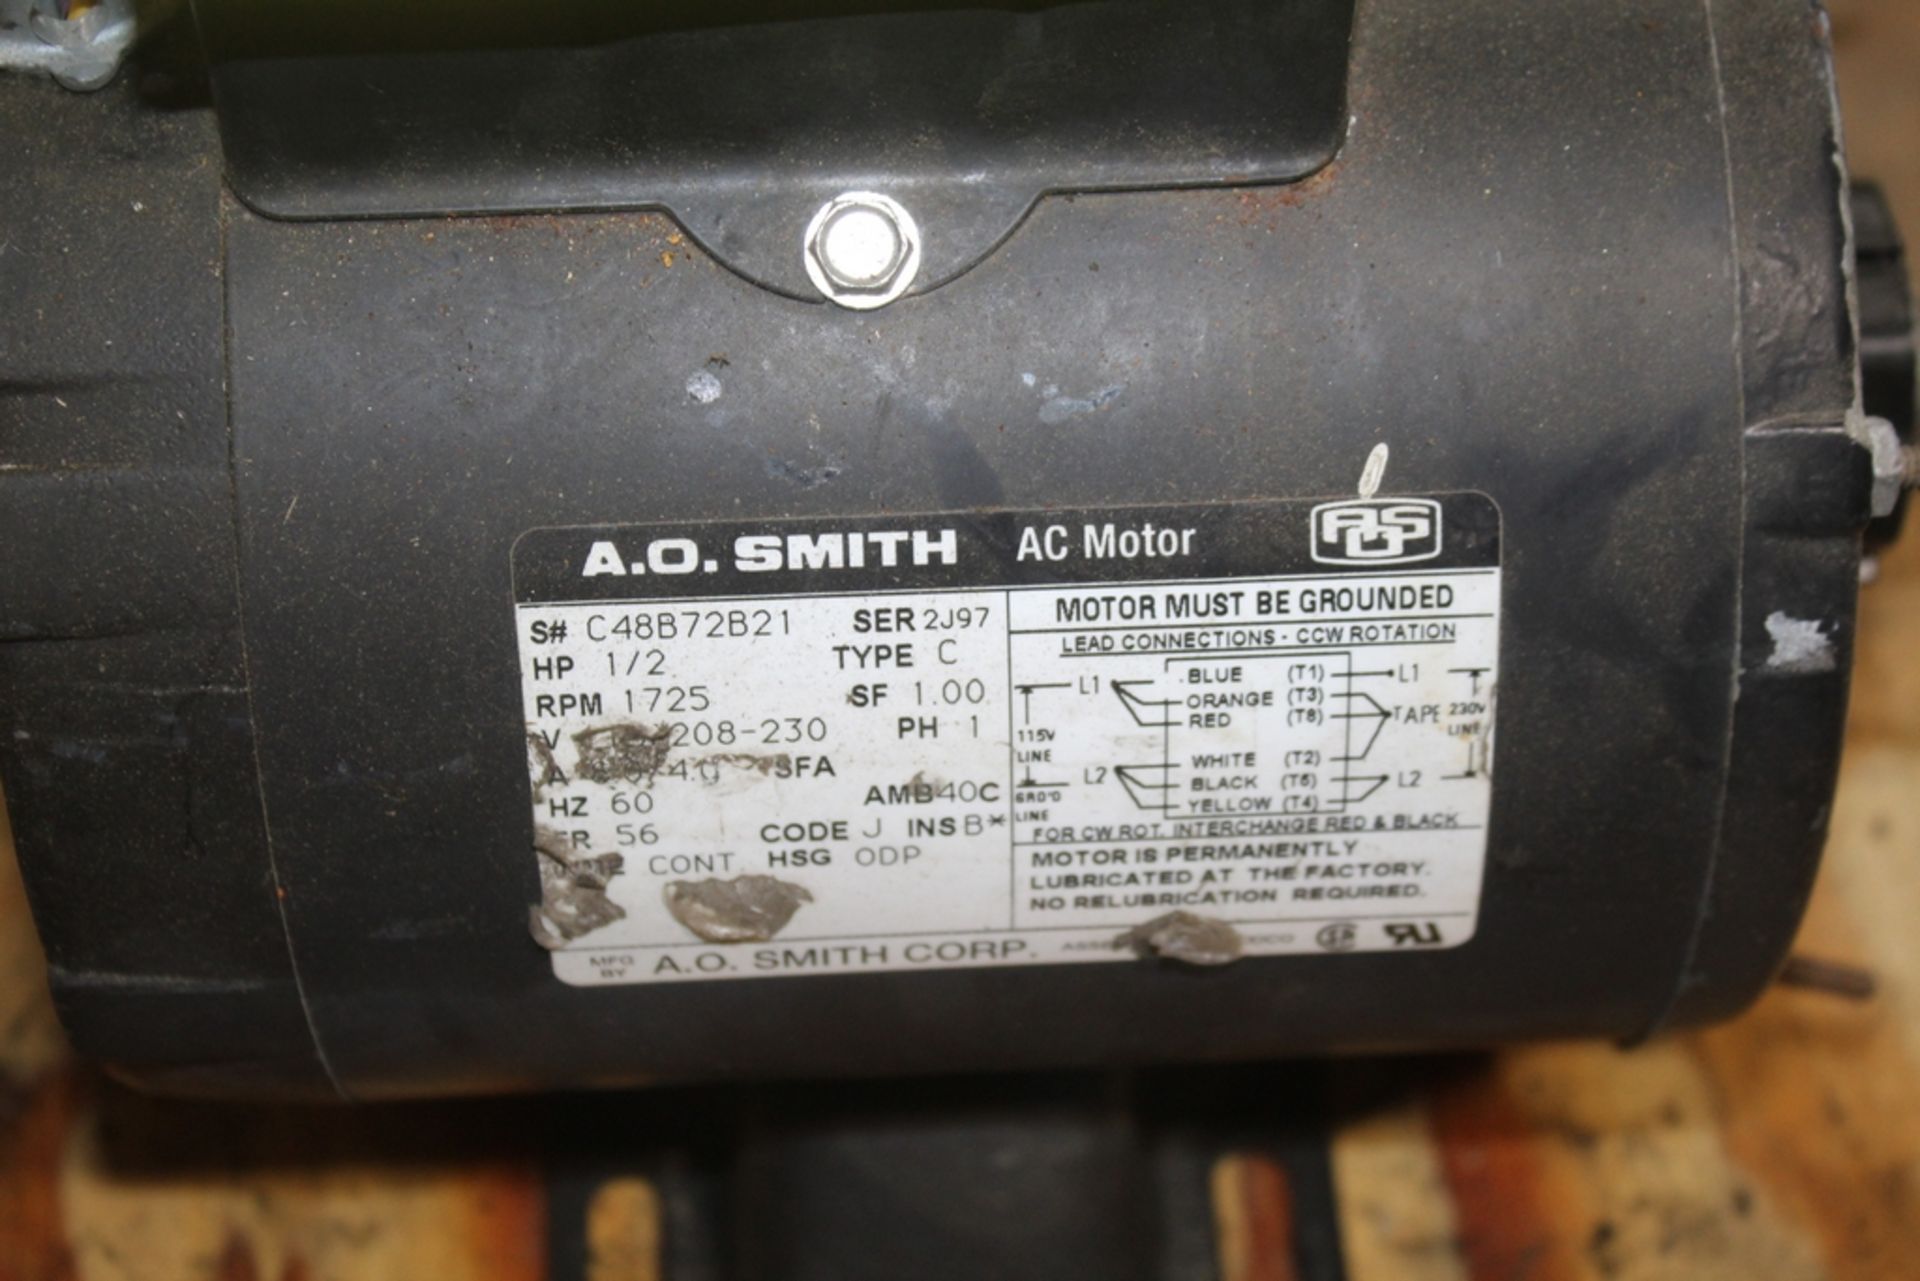 A.O. SMITH AC MOTOR, MODEL C488722B21, 1/2HP, 1-PHASE, 1,725 RPM - Image 2 of 2